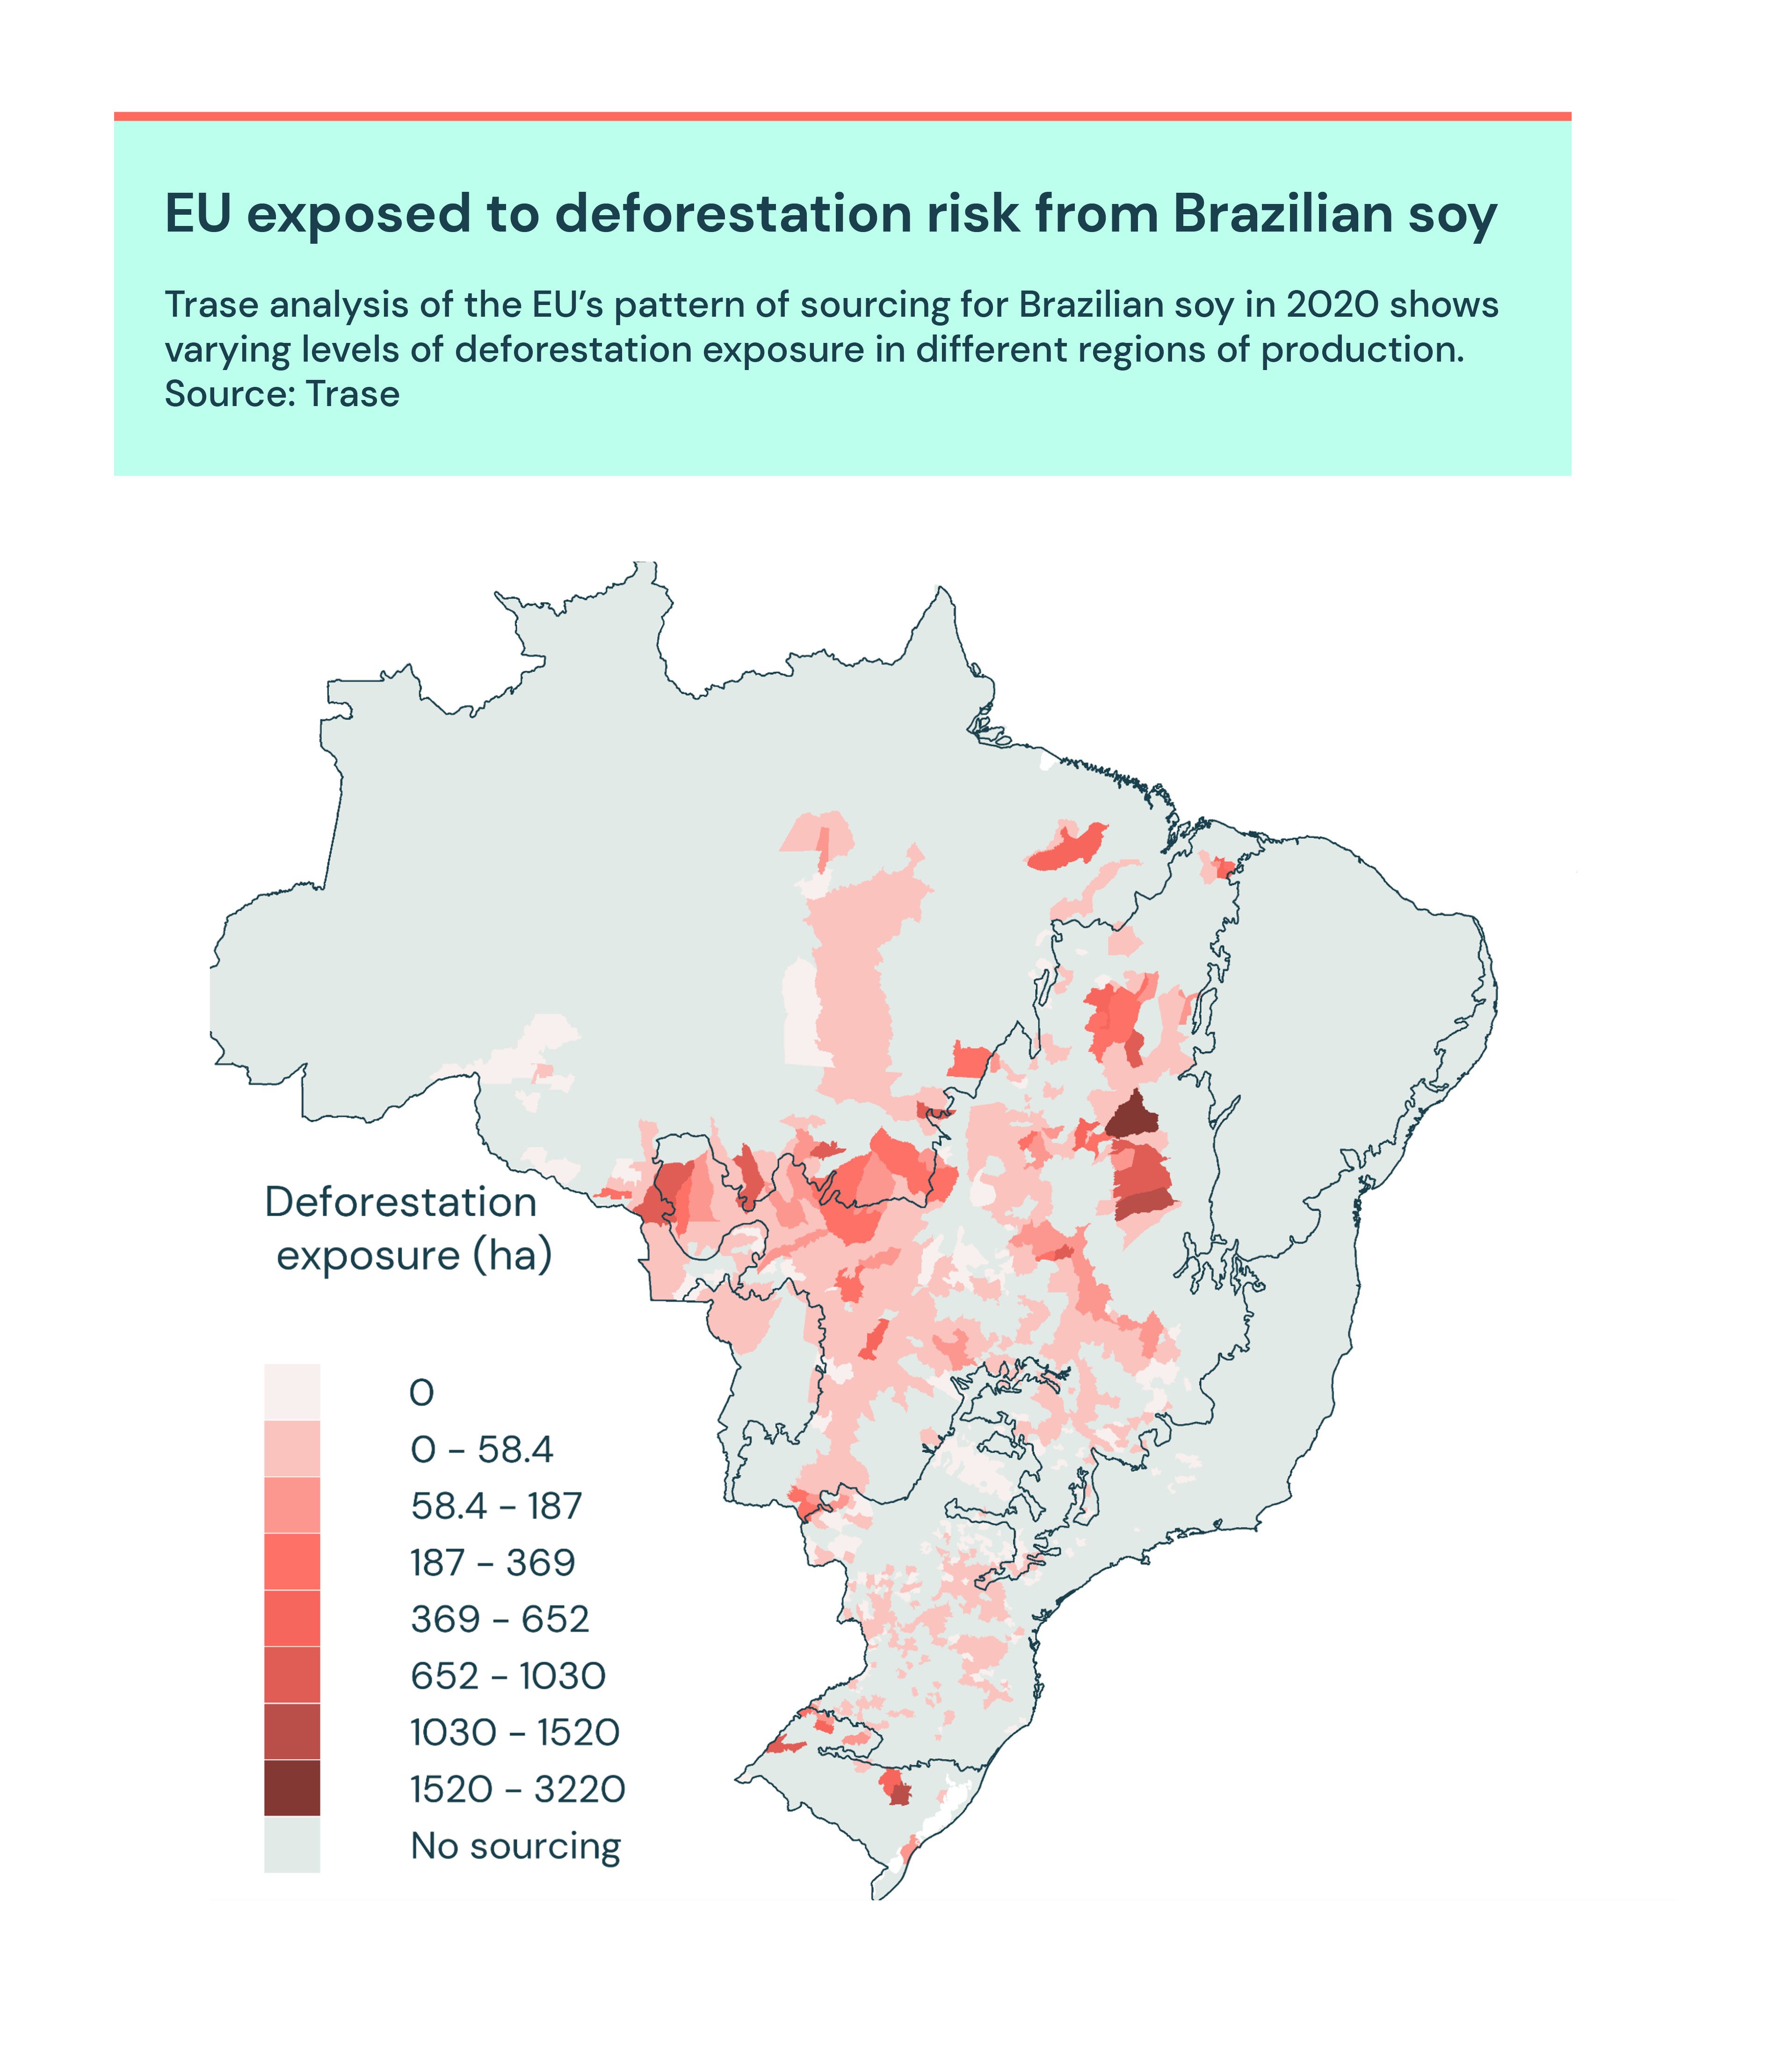 EU exposed to deforestation risk from Brazilian soy